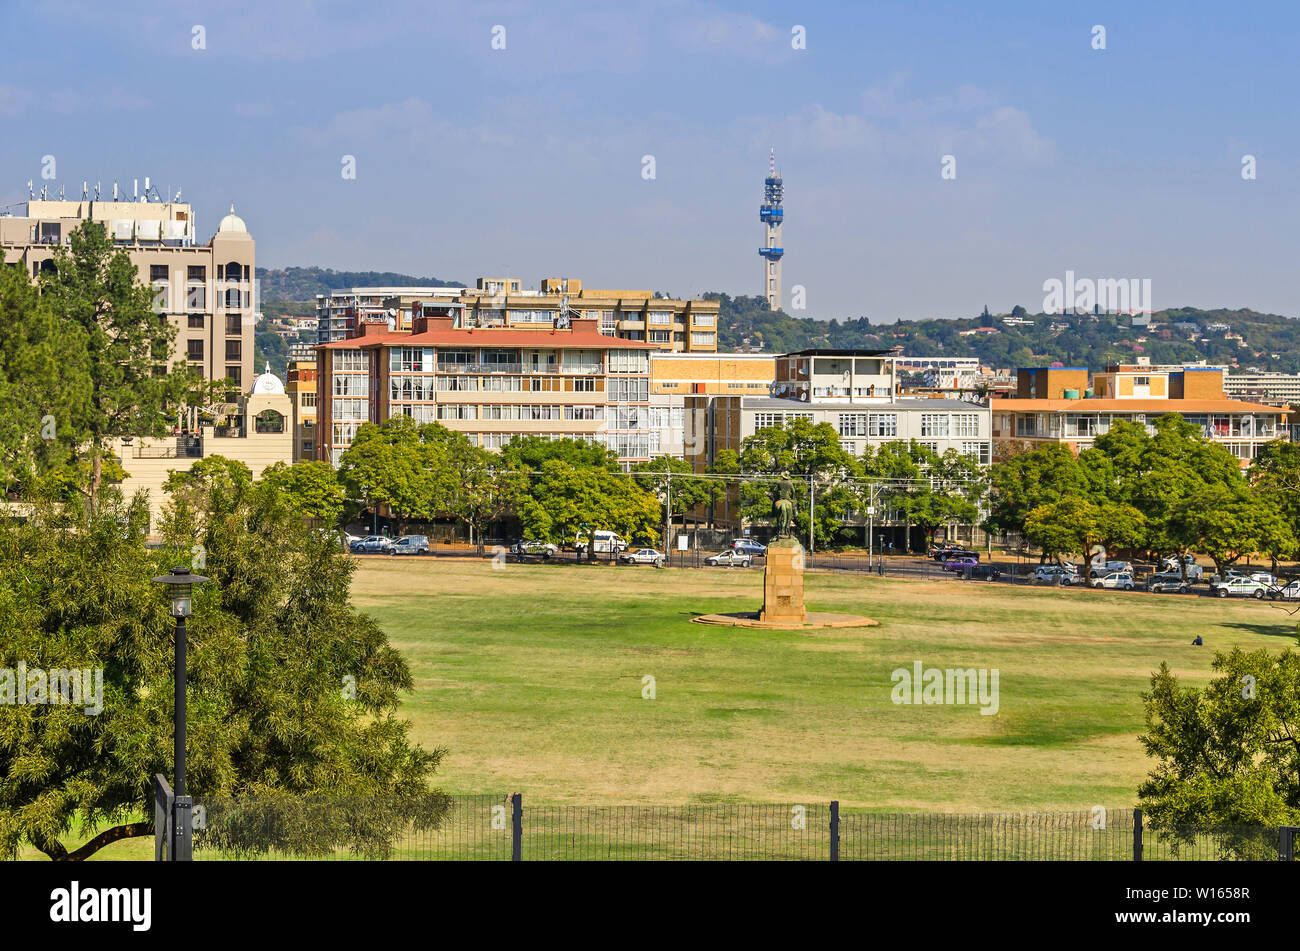 Pretoria, South Africa - May 23, 2019: View from the Union Buildings and from Meintjieskop hill with gardens, statue of Louis Botha,  Sheraton Hotel a Stock Photo